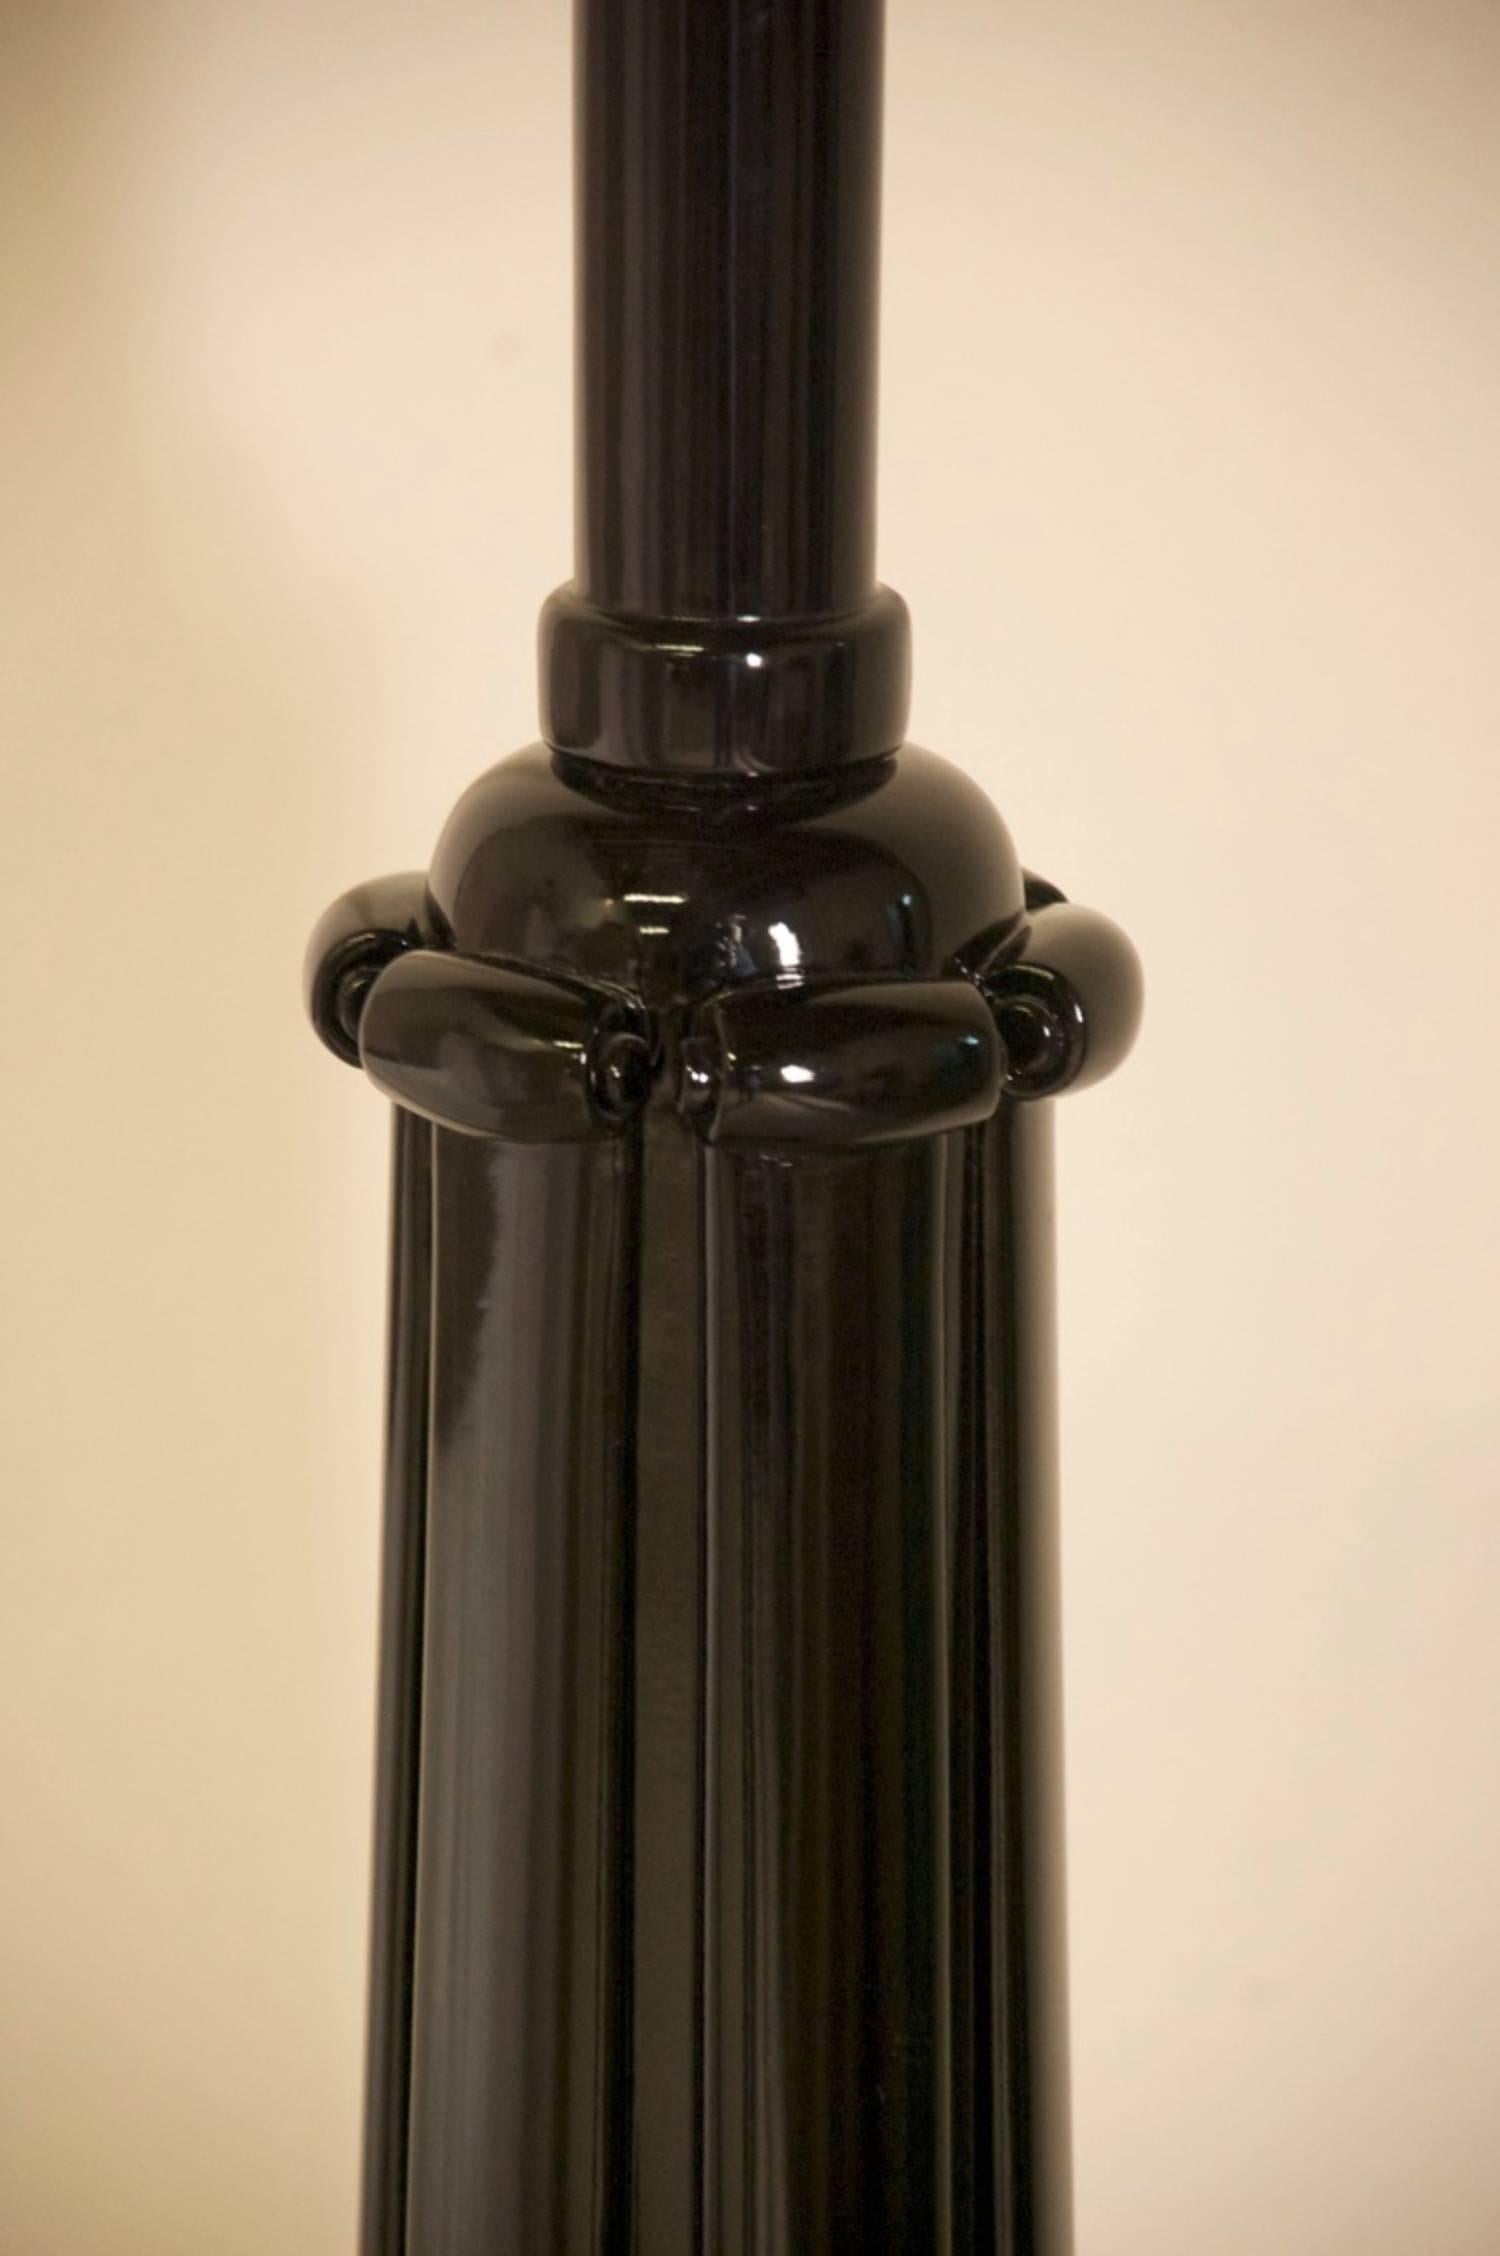 Classic French Art Deco floor lamp, circa 1925 by Süe et Mare, in black lacquer with sculptural details. Documented.

Height to top of shade is 74